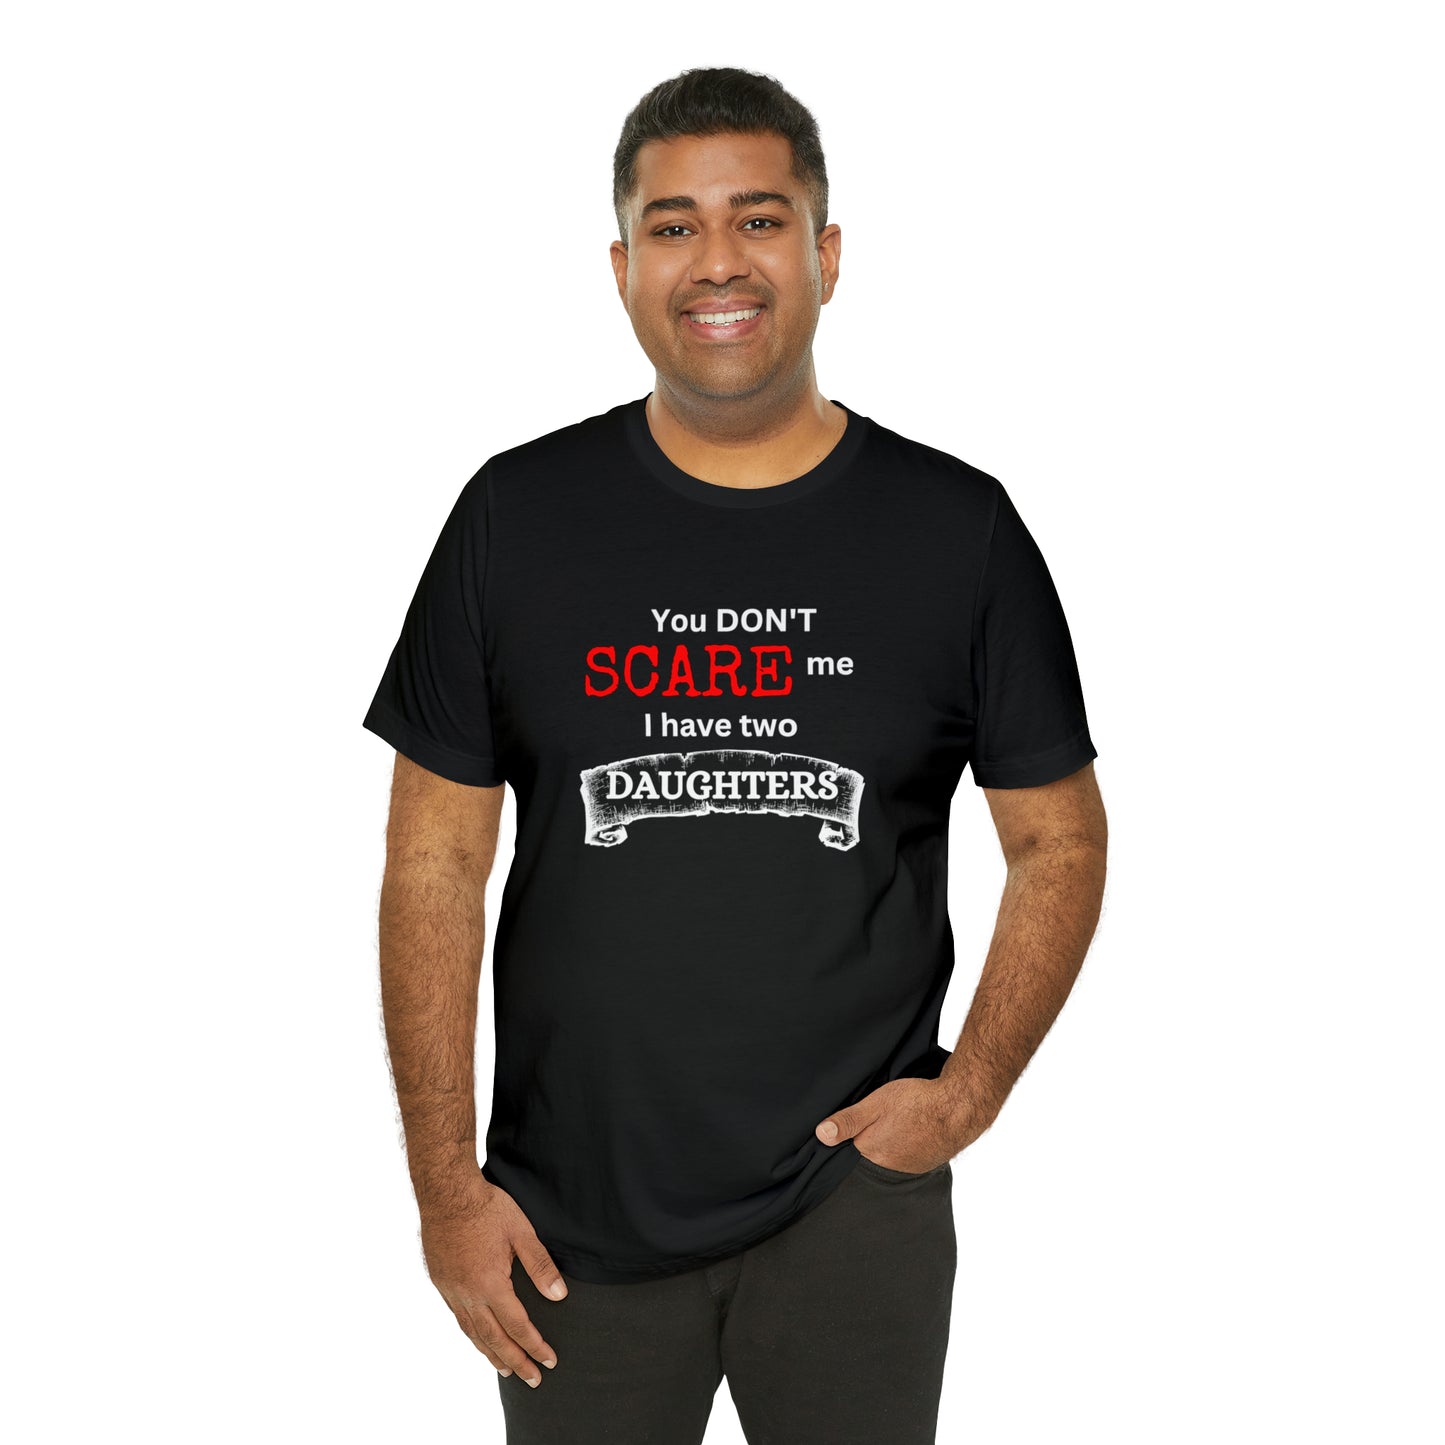 You Don't scare Me T-Shirt | Funny Dad T-shirt, Father's Day Gift, T-shirt For Dad, Husband T-shirt, Funny Men's Shirt